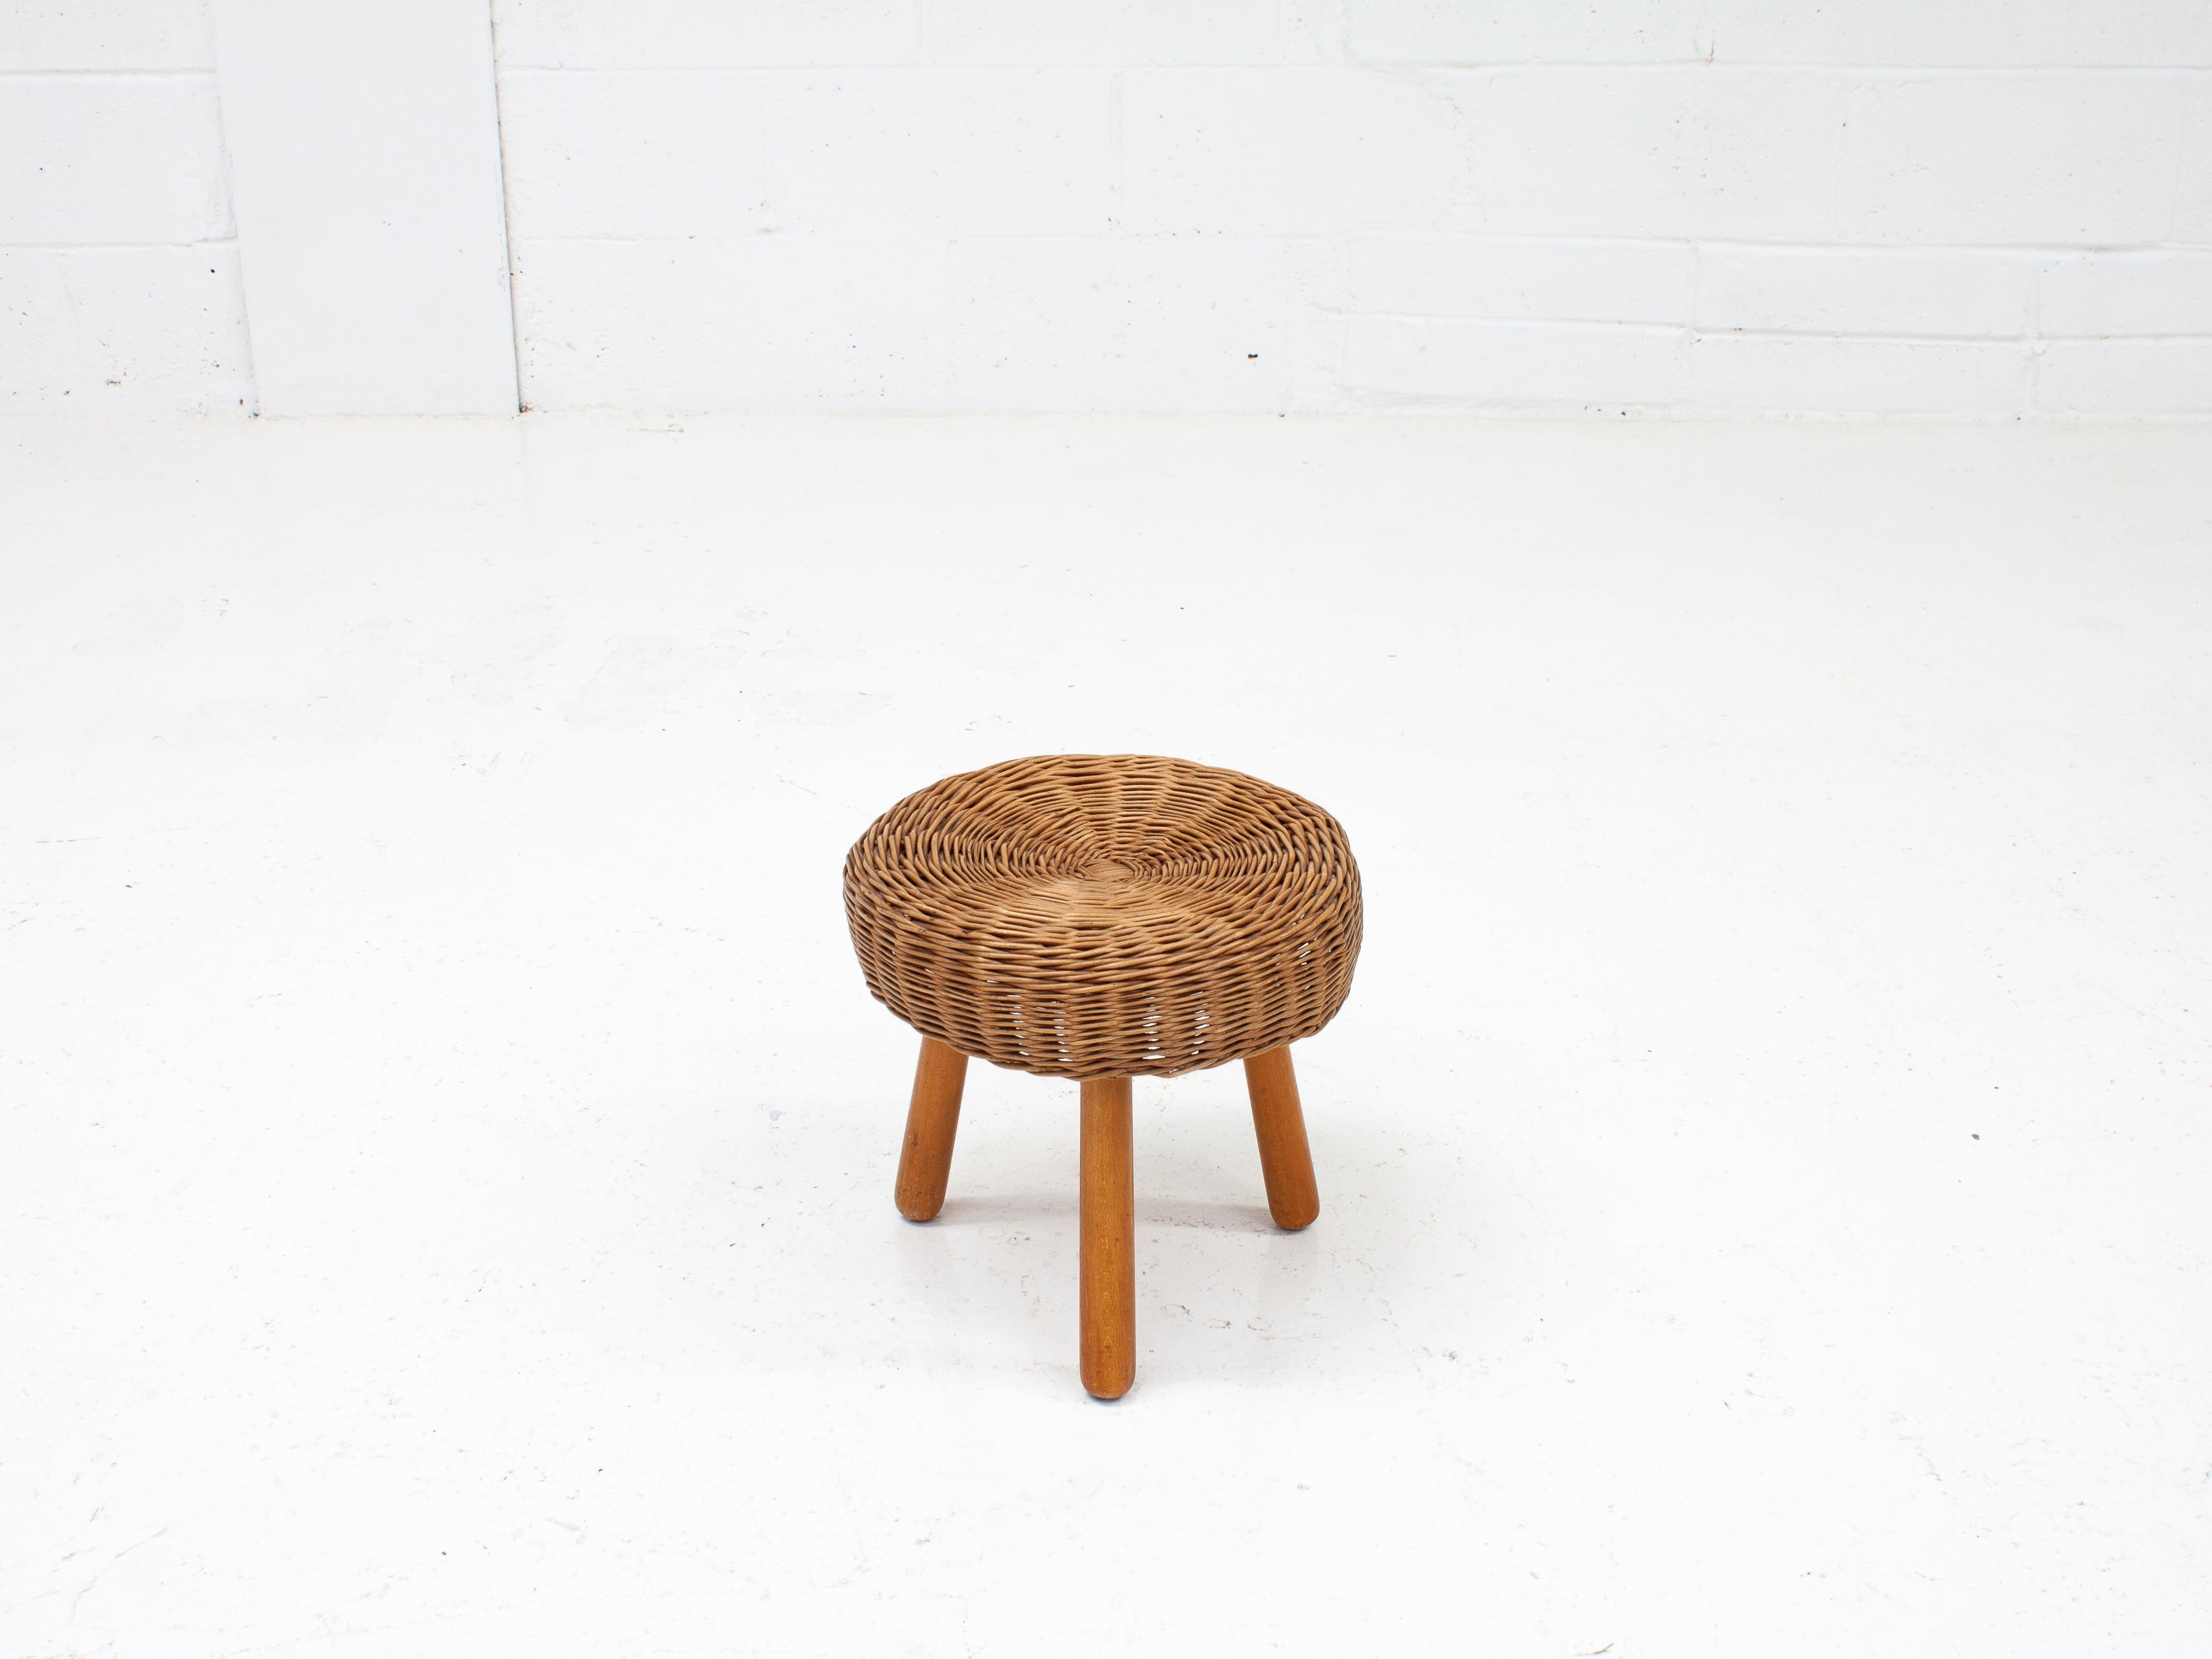 Tony Paul Attributed Wicker Stool, 1950/60s For Sale 8